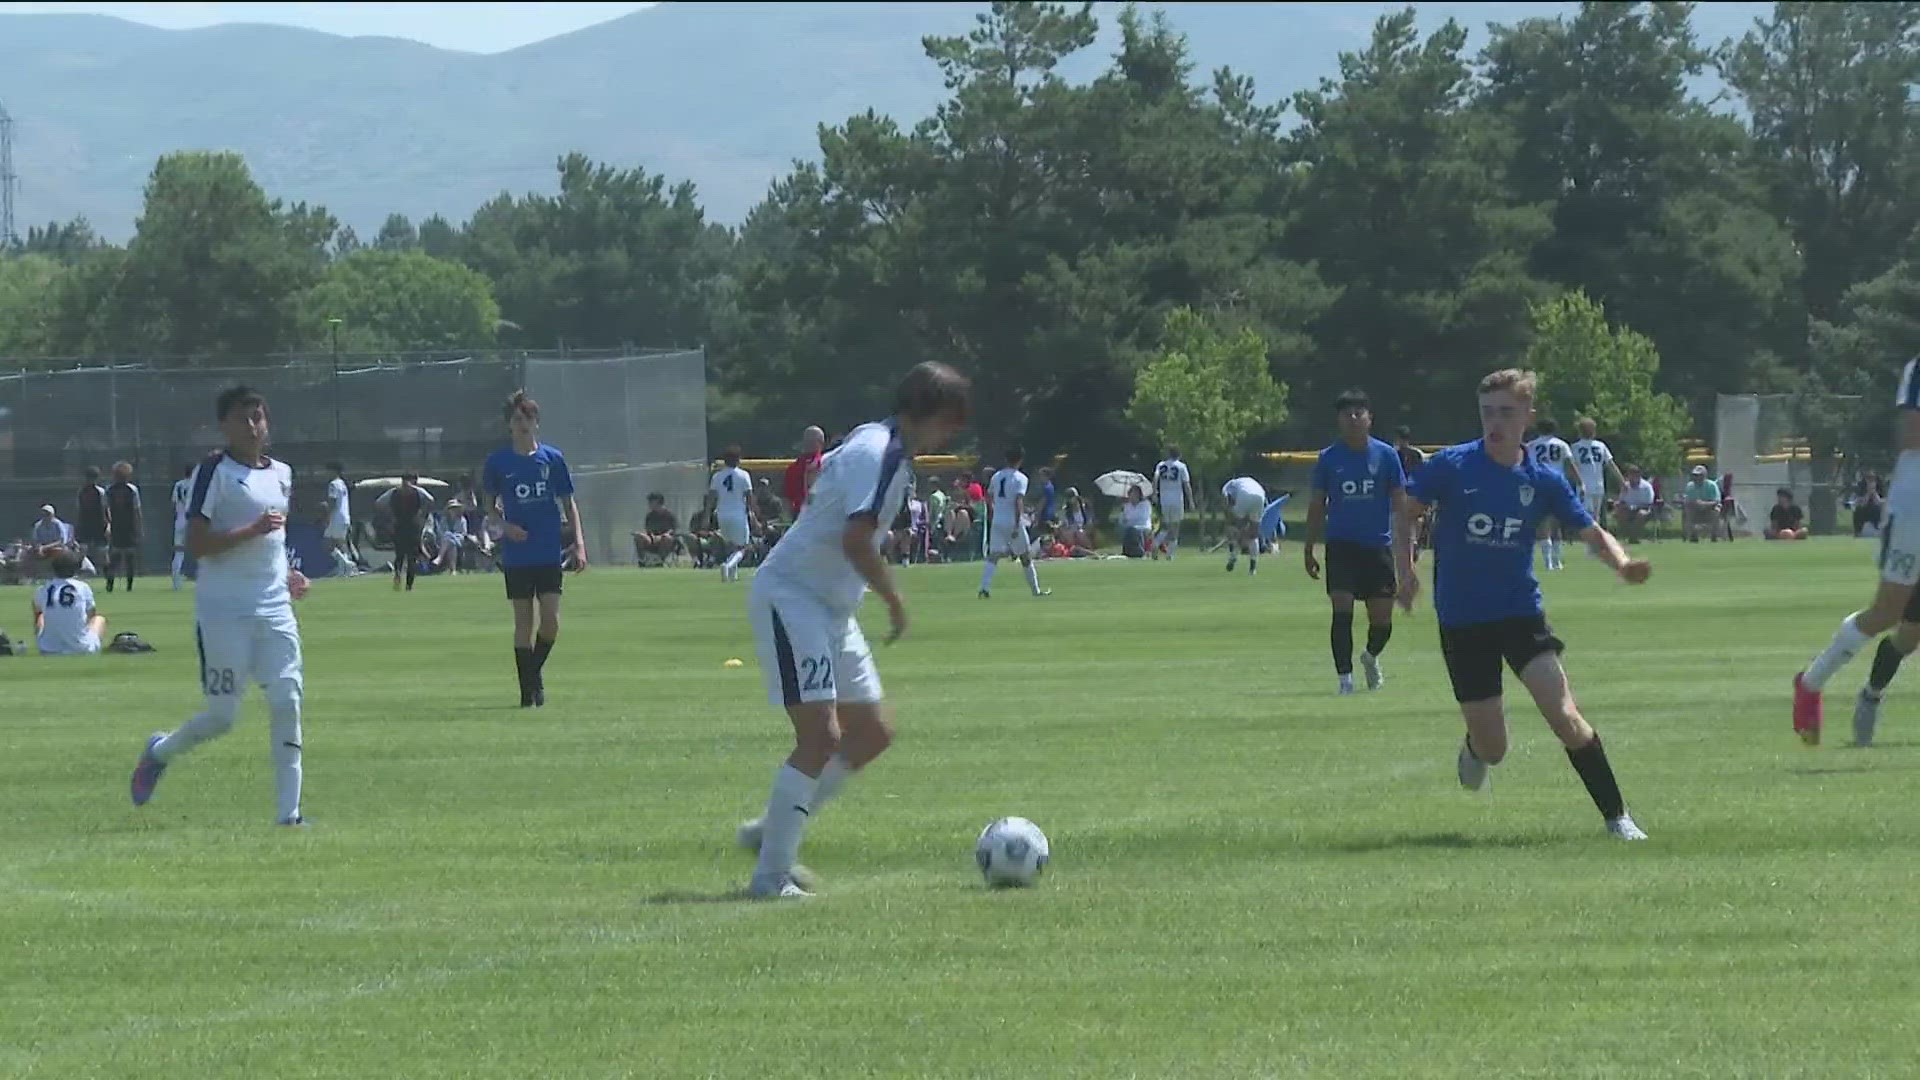 Presidents Cup soccer tournament set to bring big business, competition to Boise ktvb